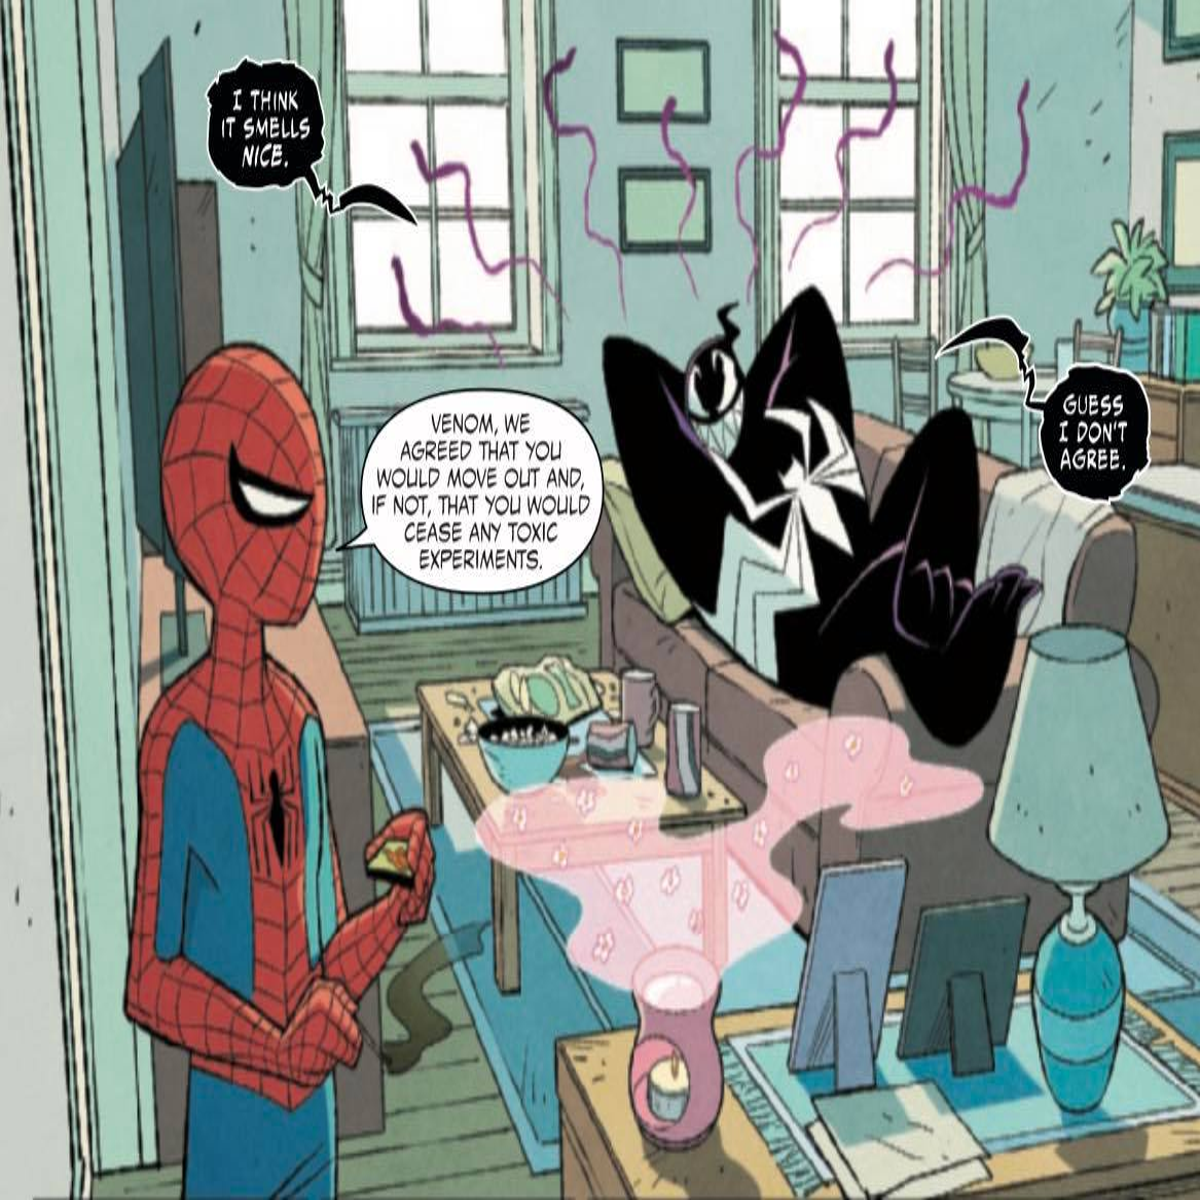 Venom is Spider-Man's roommate, and it's not going well | Popverse